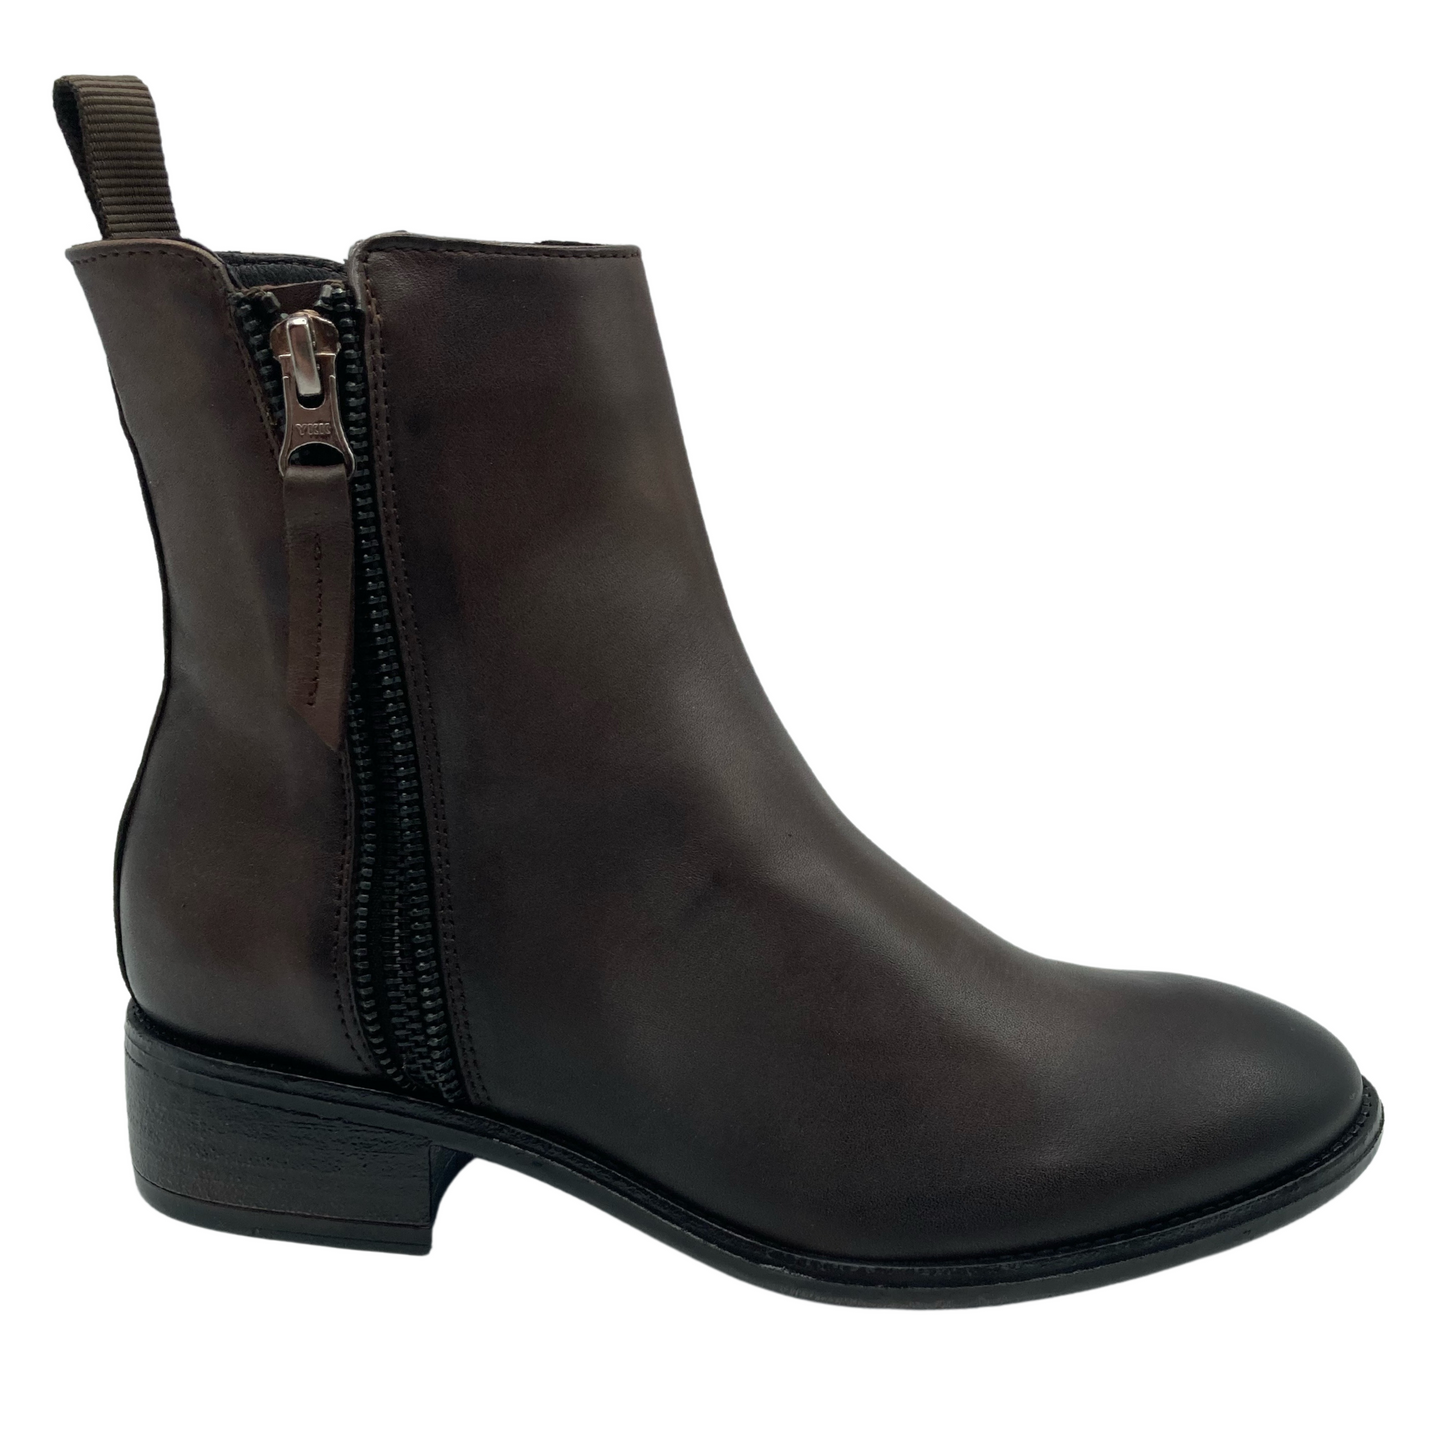 Right facing view of brown leather boot with zipper closure, brown pull tab and block heel